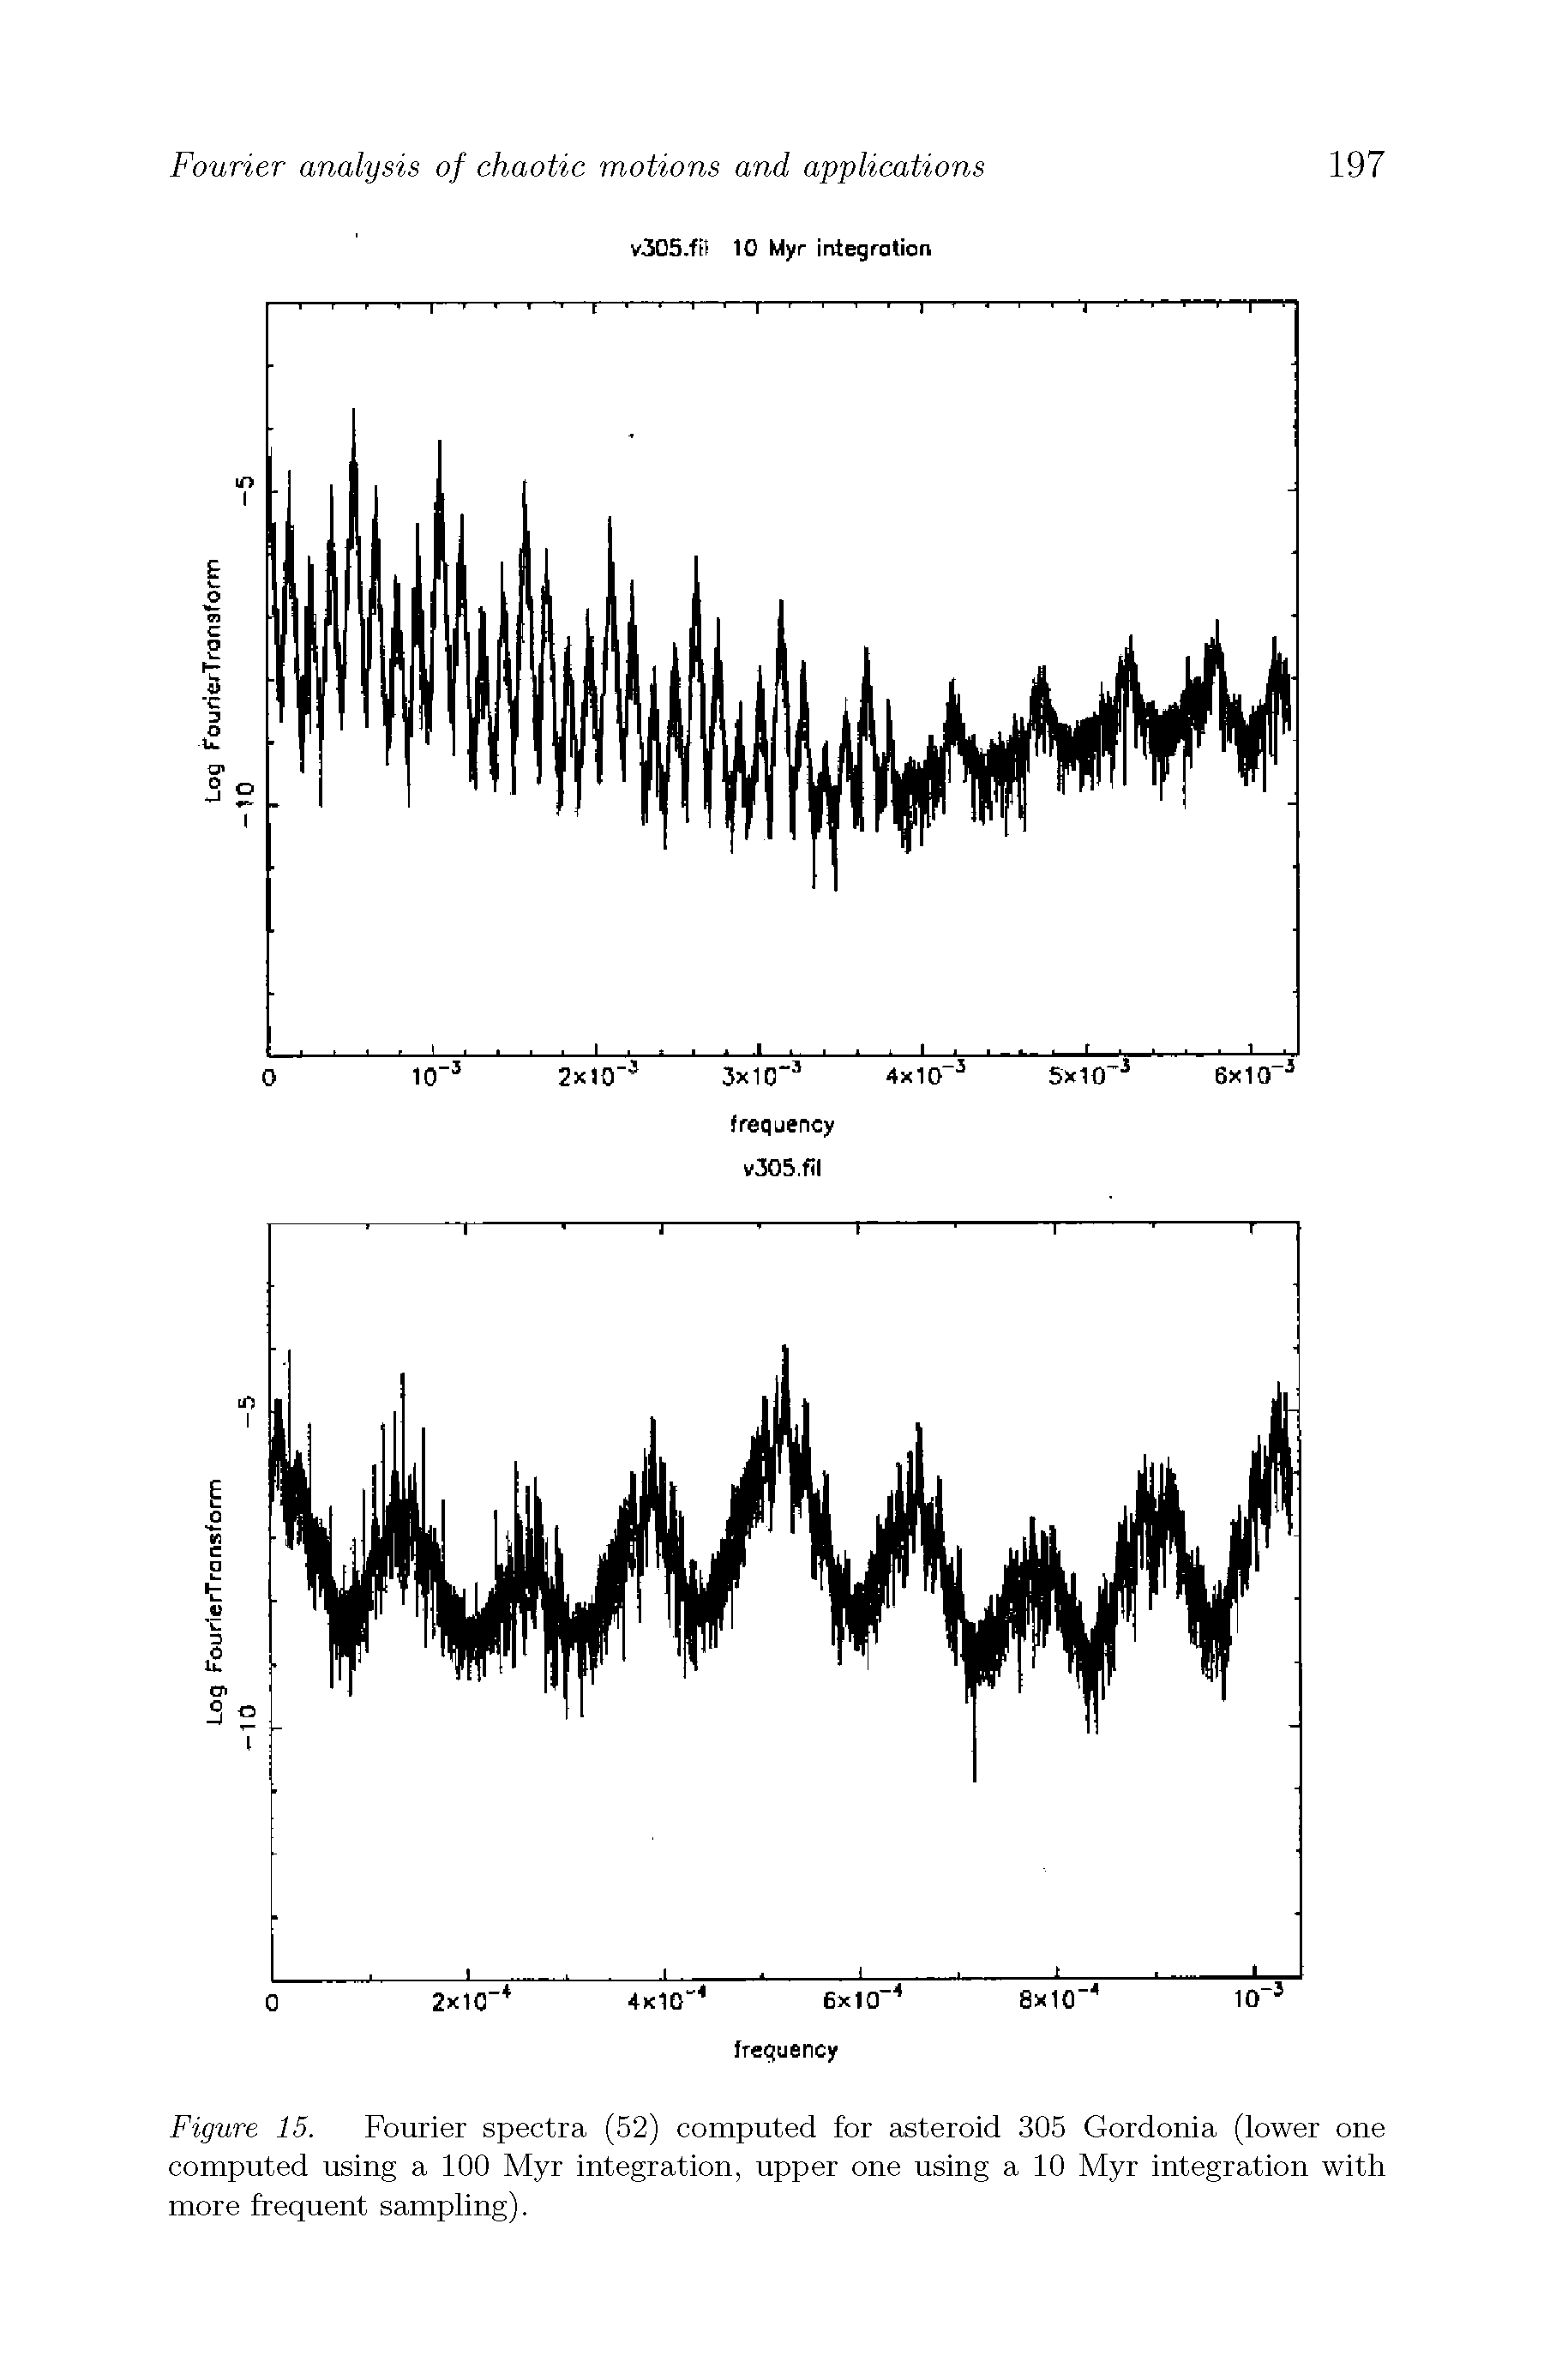 Figure 15. Fourier spectra (52) computed for asteroid 305 Gordonia (lower one computed using a 100 Myr integration, upper one using a 10 Myr integration with more frequent sampling).